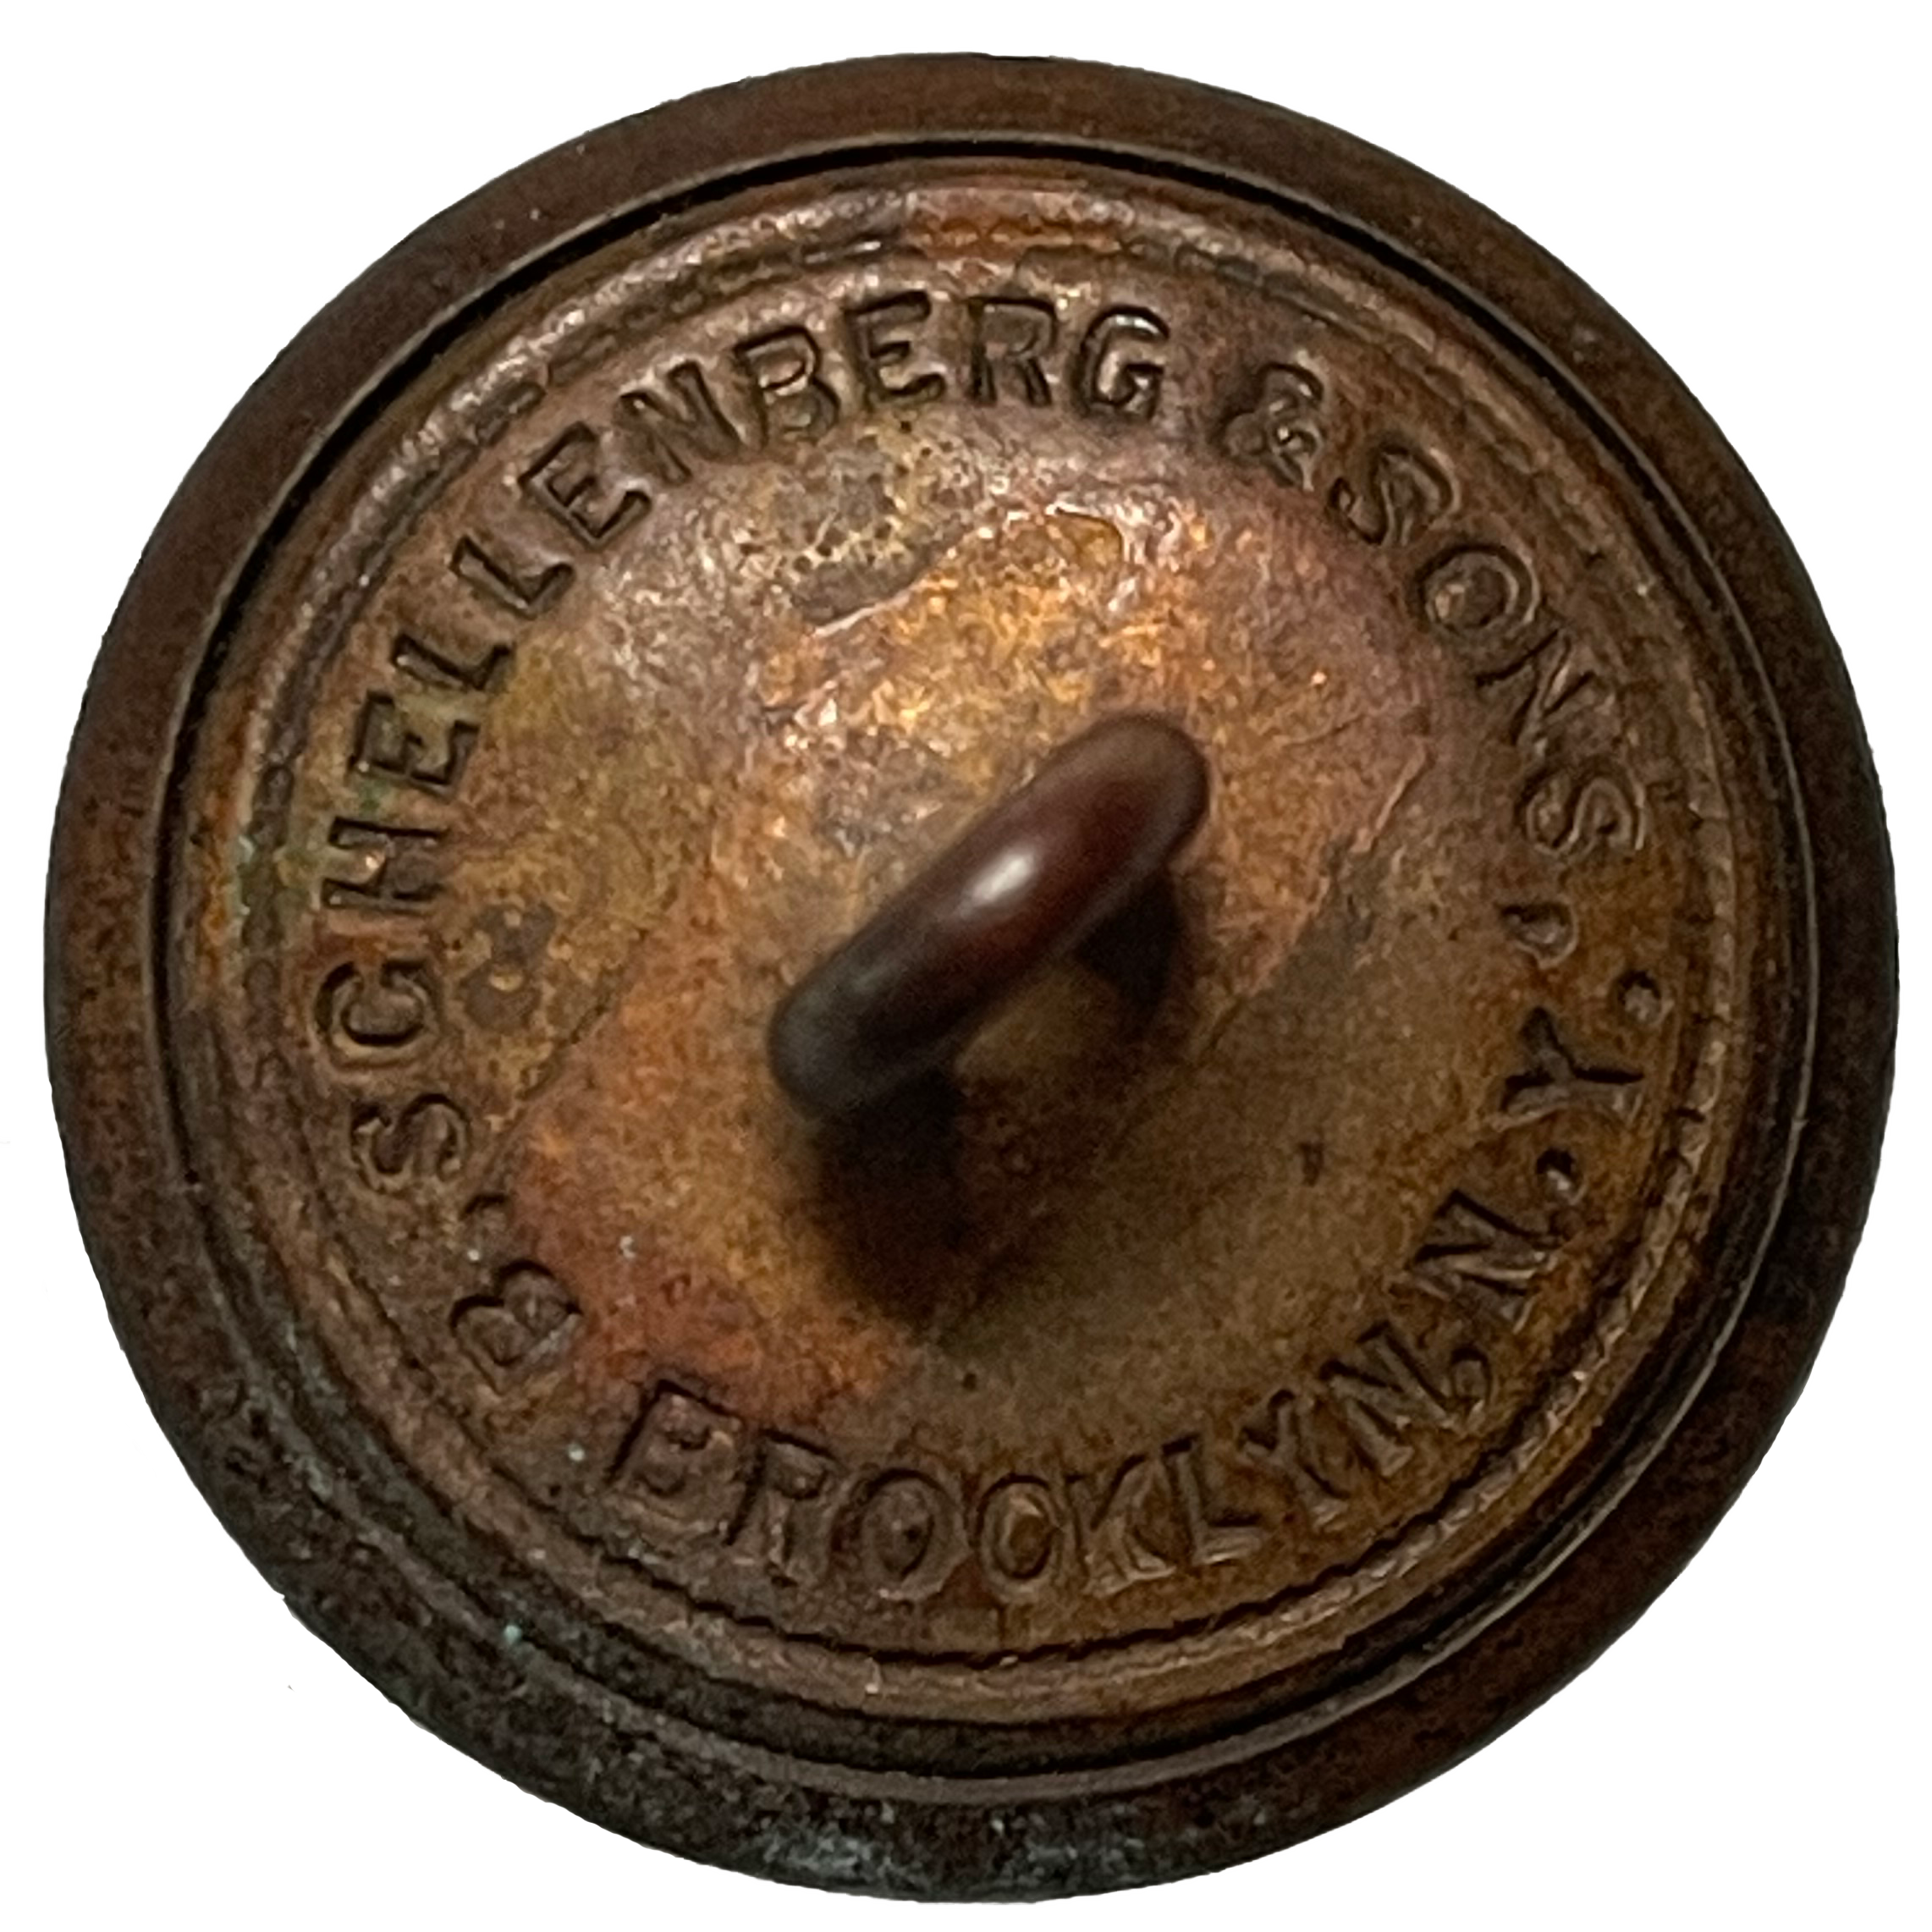 Back of a button stamped for B. Schellenberg